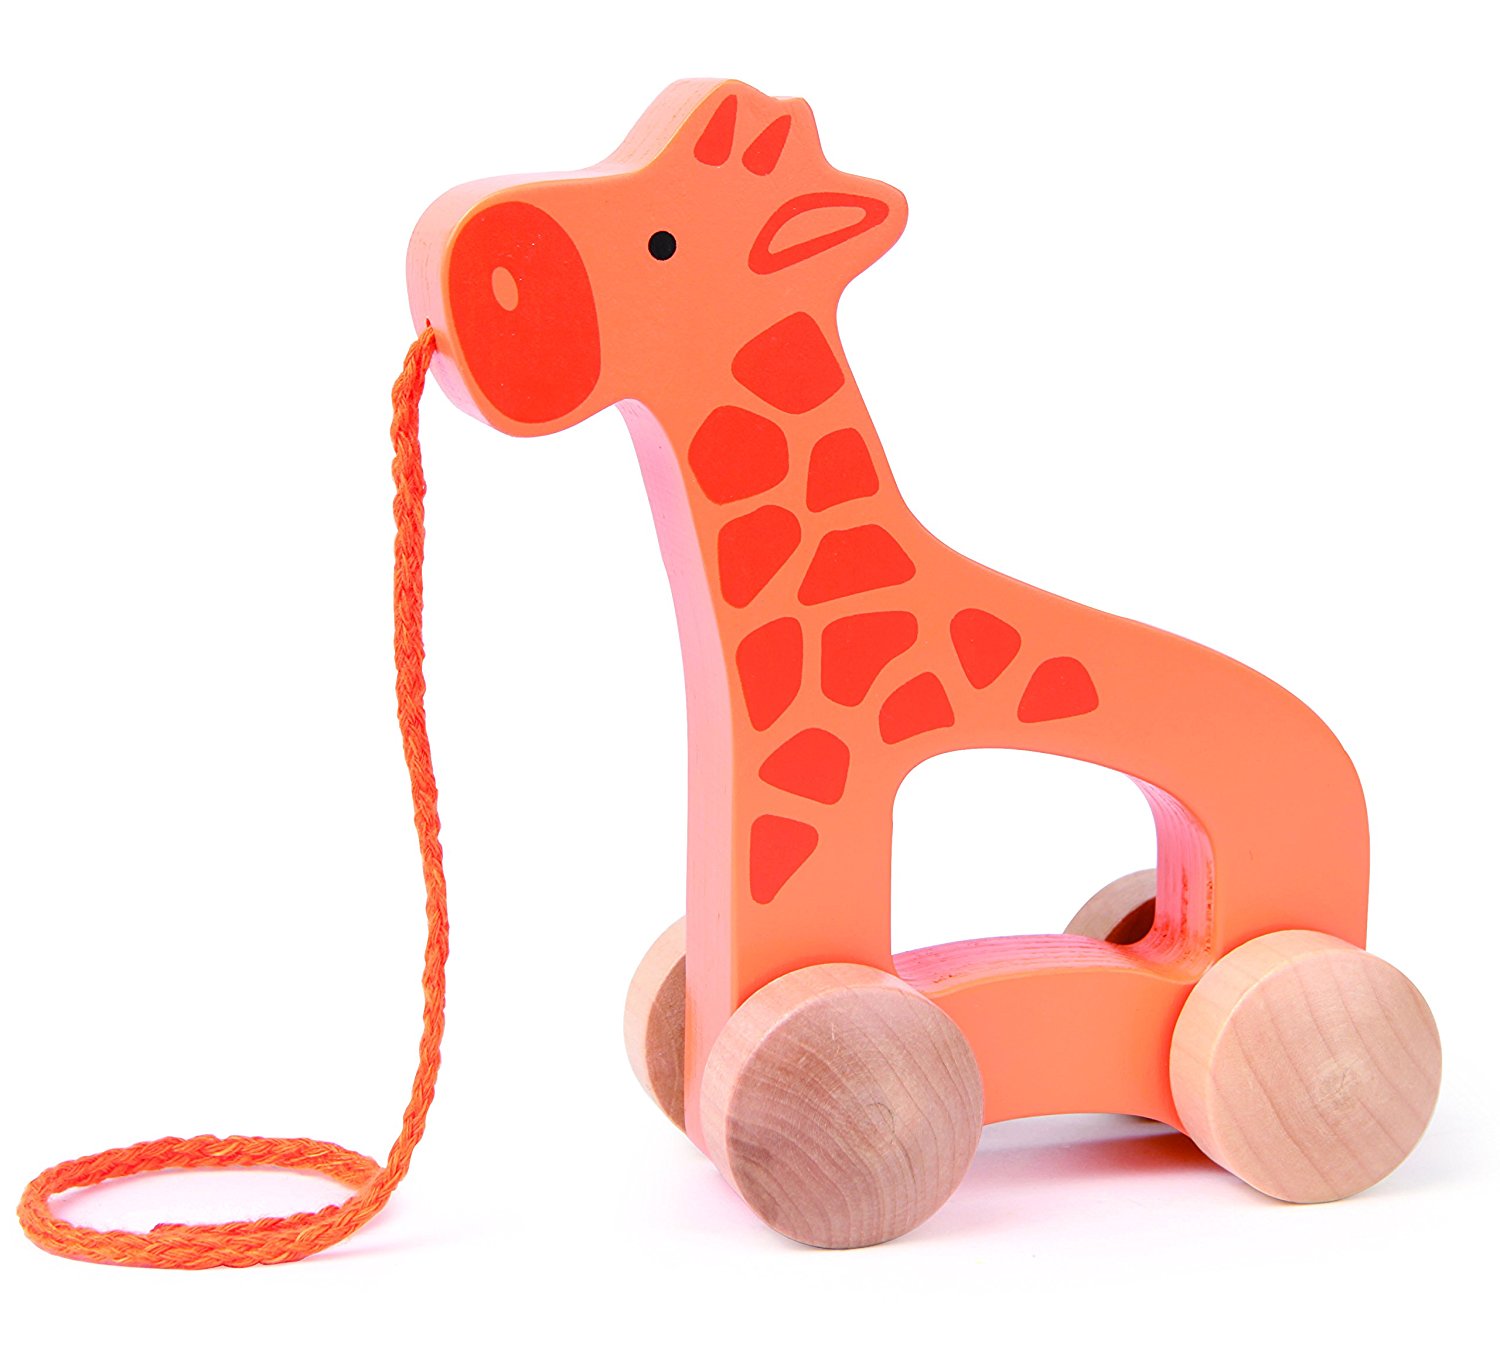 Amazon.com: Hape Giraffe Wooden Push and Pull Toddler Toy: Toys & Games